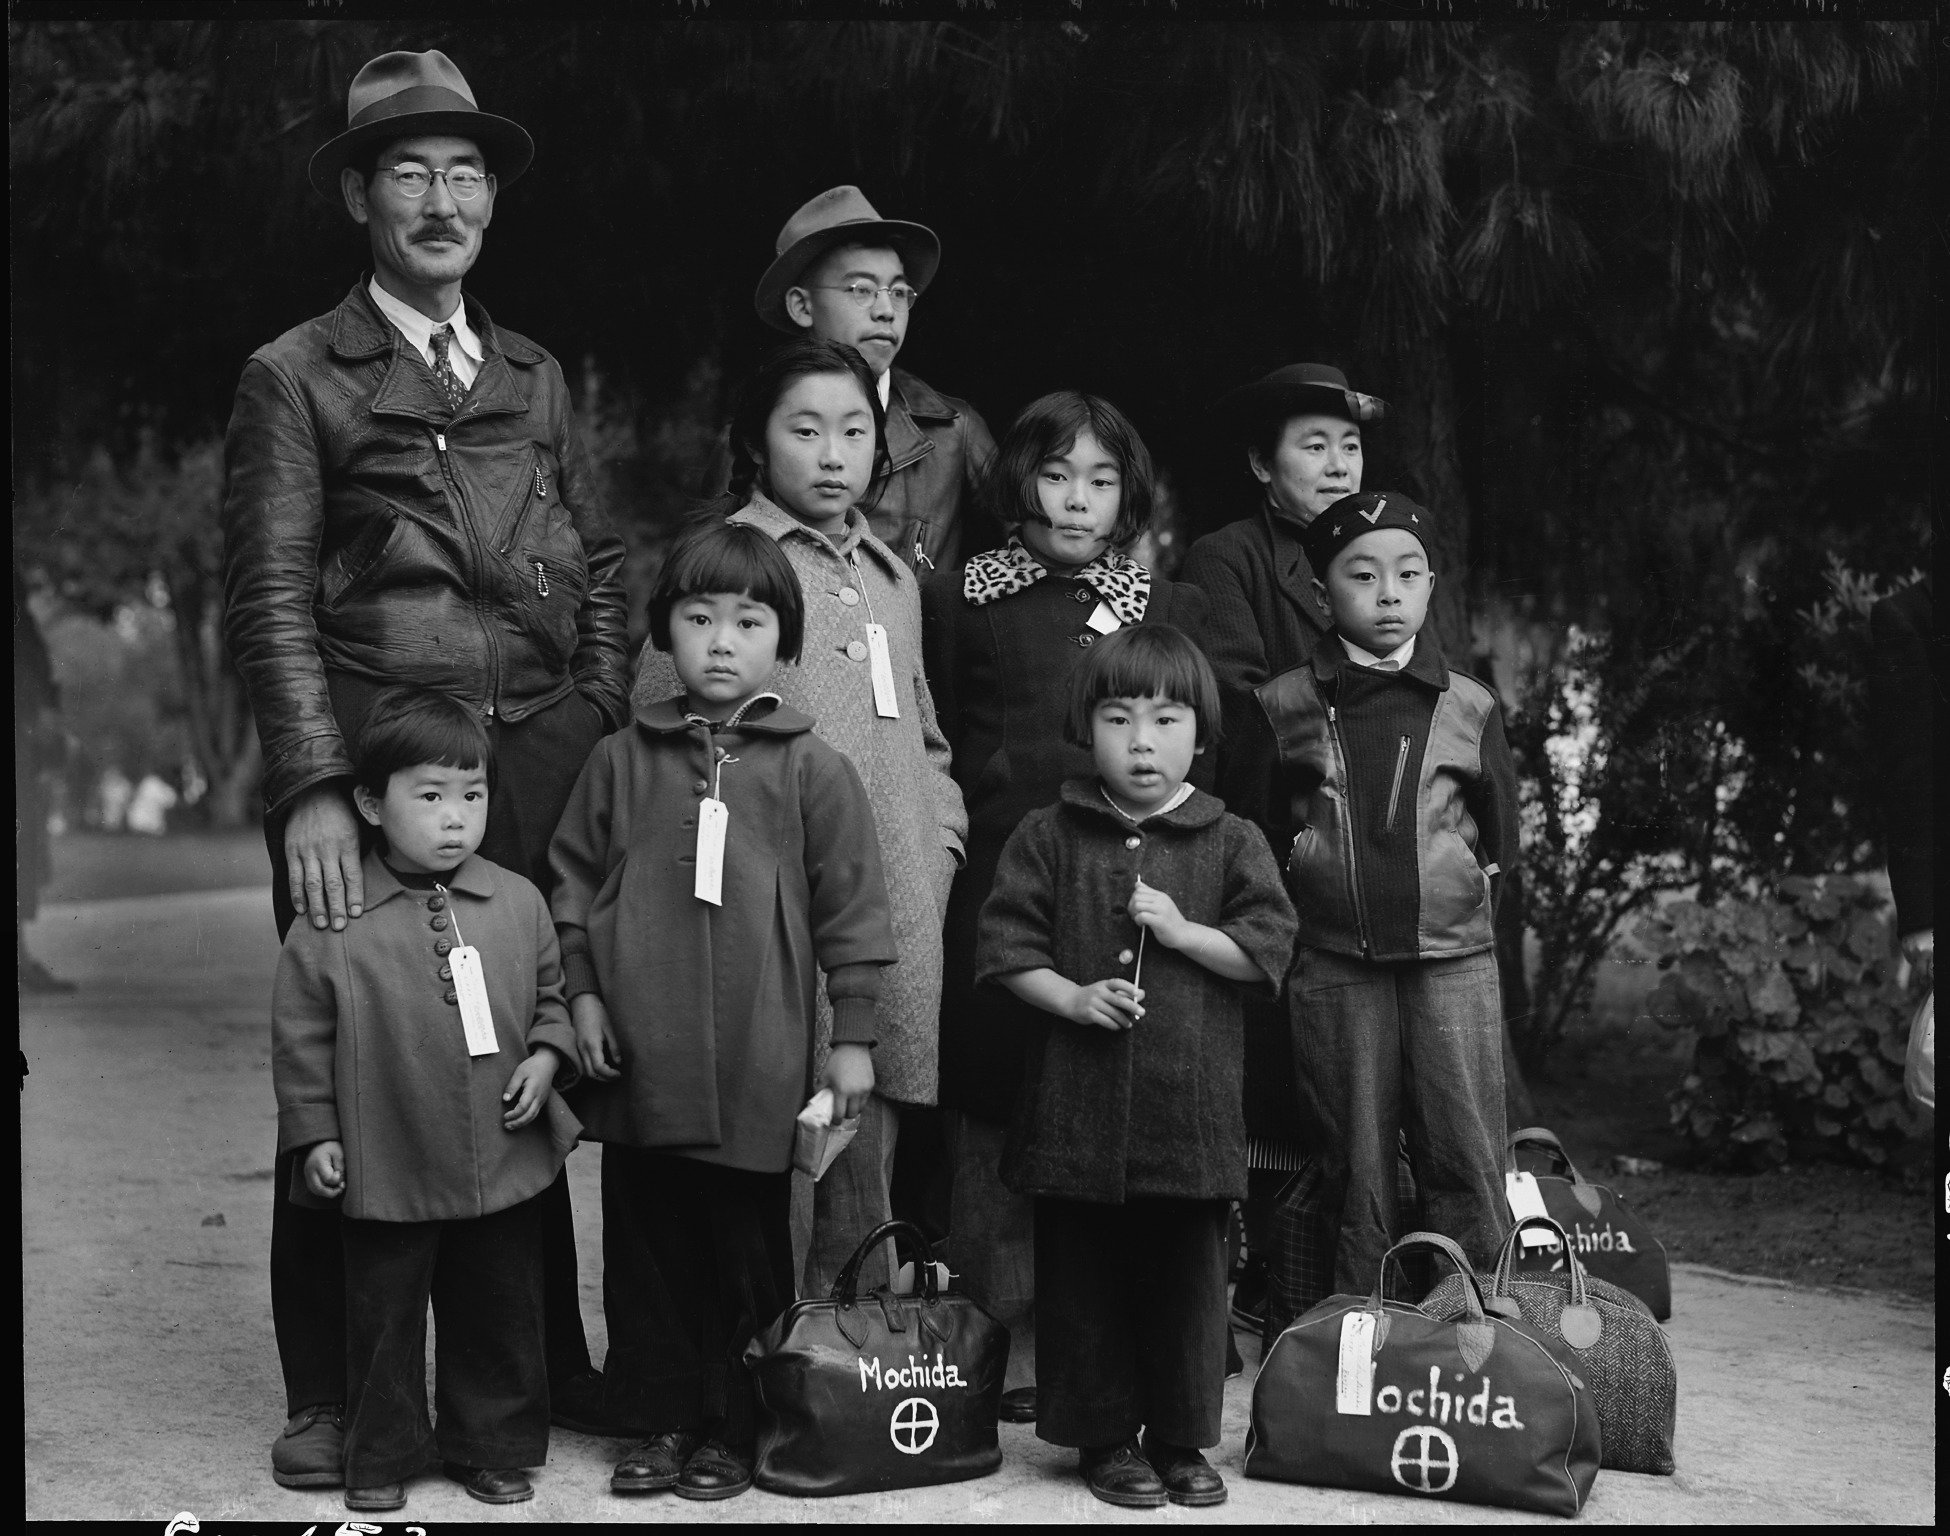 The Machida family waited for transportation in Hayward, California, in May 1942. (National Archives) 